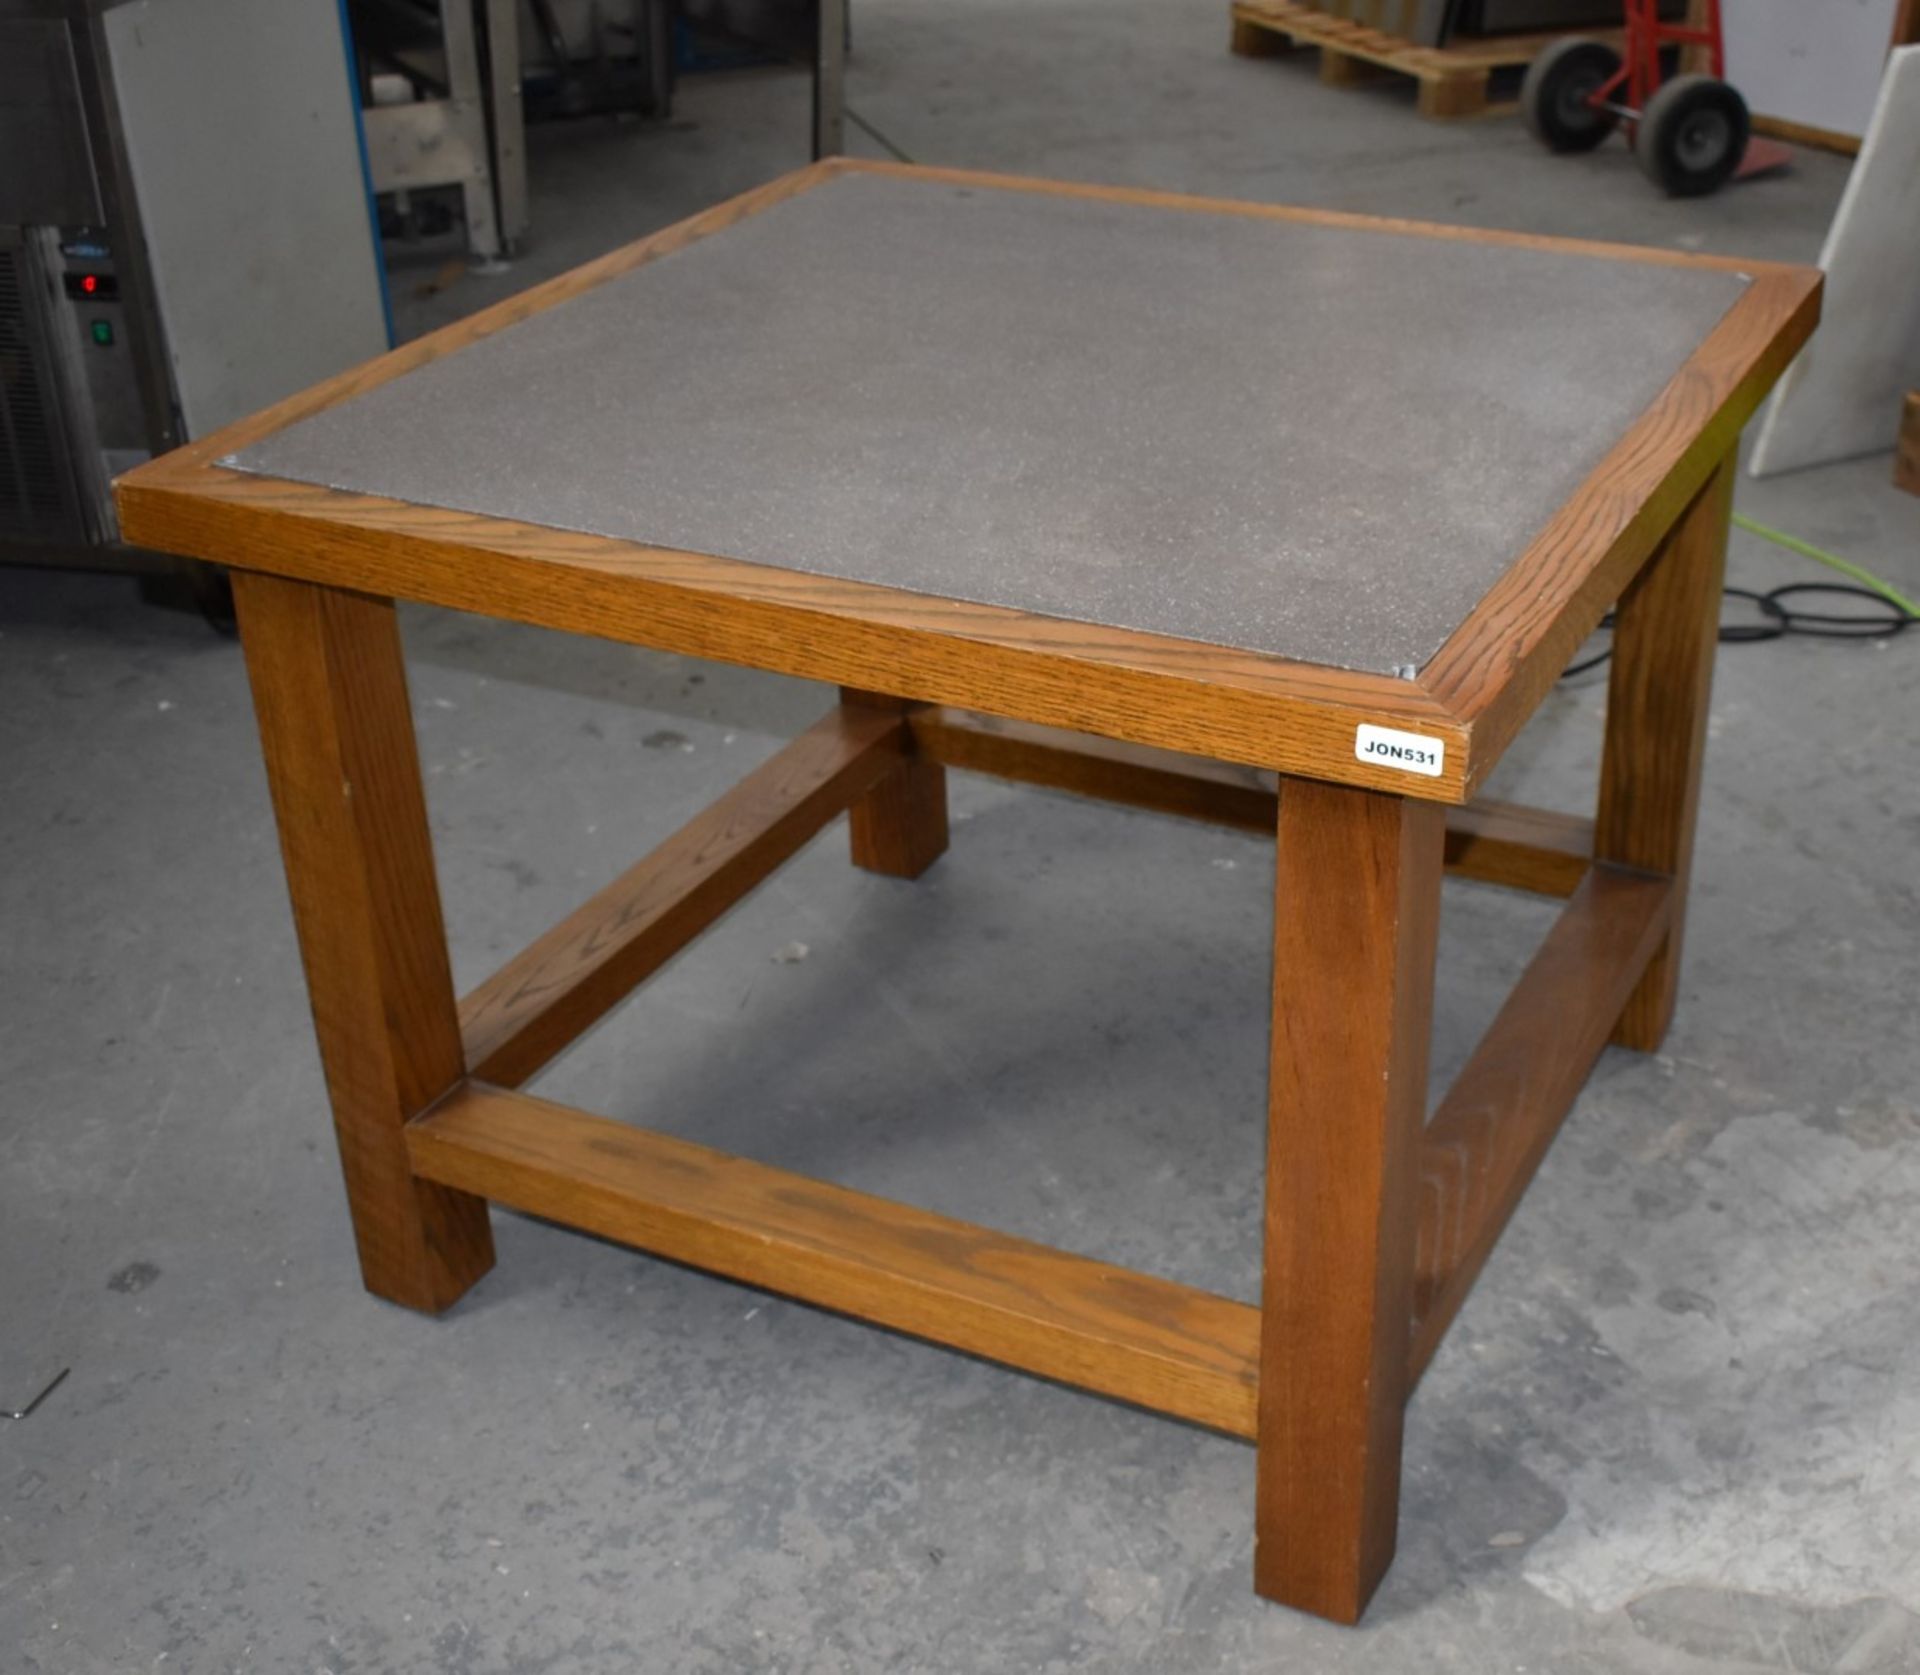 1 x Solid Oak Table With a Stone Insert Top - H77 x W100 x D100 cms - Image 2 of 9